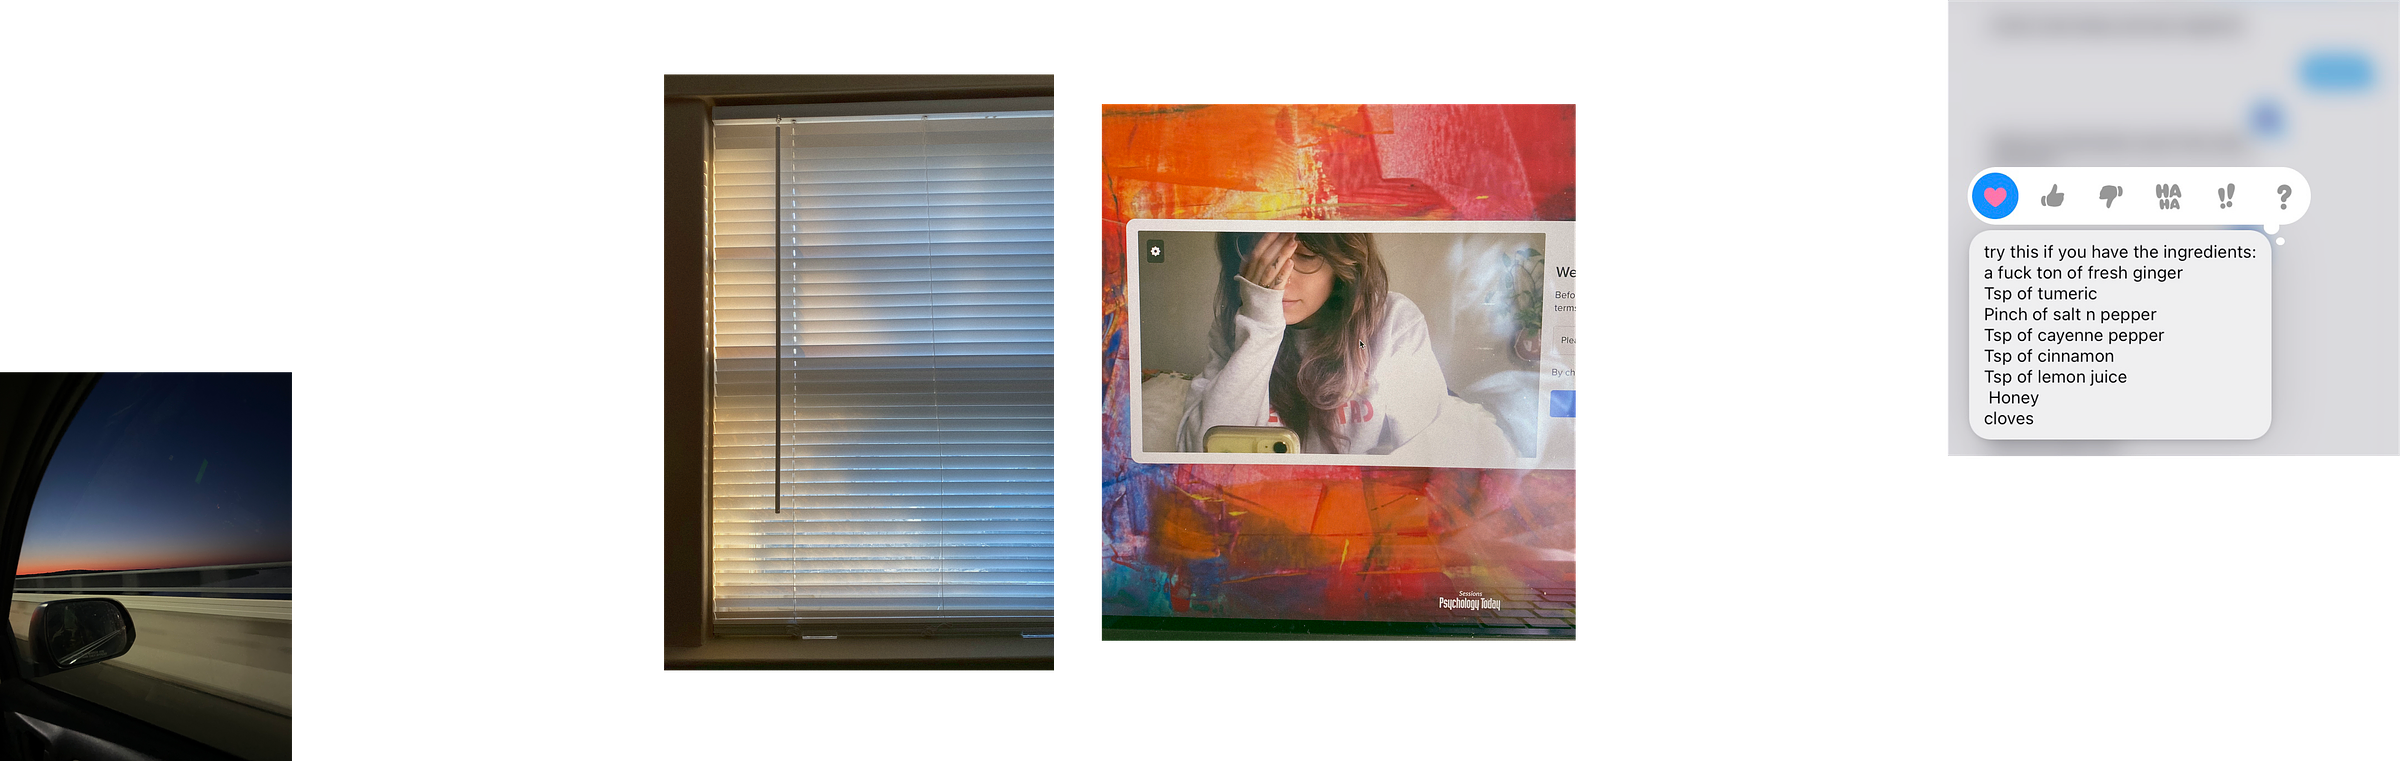 4 images in a line. the first is a photograph taken from the passenger seat of a car at night; the sun is setting and you can see the rear view mirror in the frame. The 2nd is a photograph of a window with dappled golden hour light coming through the shades. Third is an iphone selfie of the author in the camera of the psychology today therapy portal. The last image is a screenshot of a text message exchange with Melissa where she is giving the recipe for an immune system boost tea. The recipe includes a fuck ton of ginger, tsp of turmeric, pinch of salt & pepper, tsp of cayenne pepper, tsp of cinnamon, tsp of lemon juice, honey, and cloves